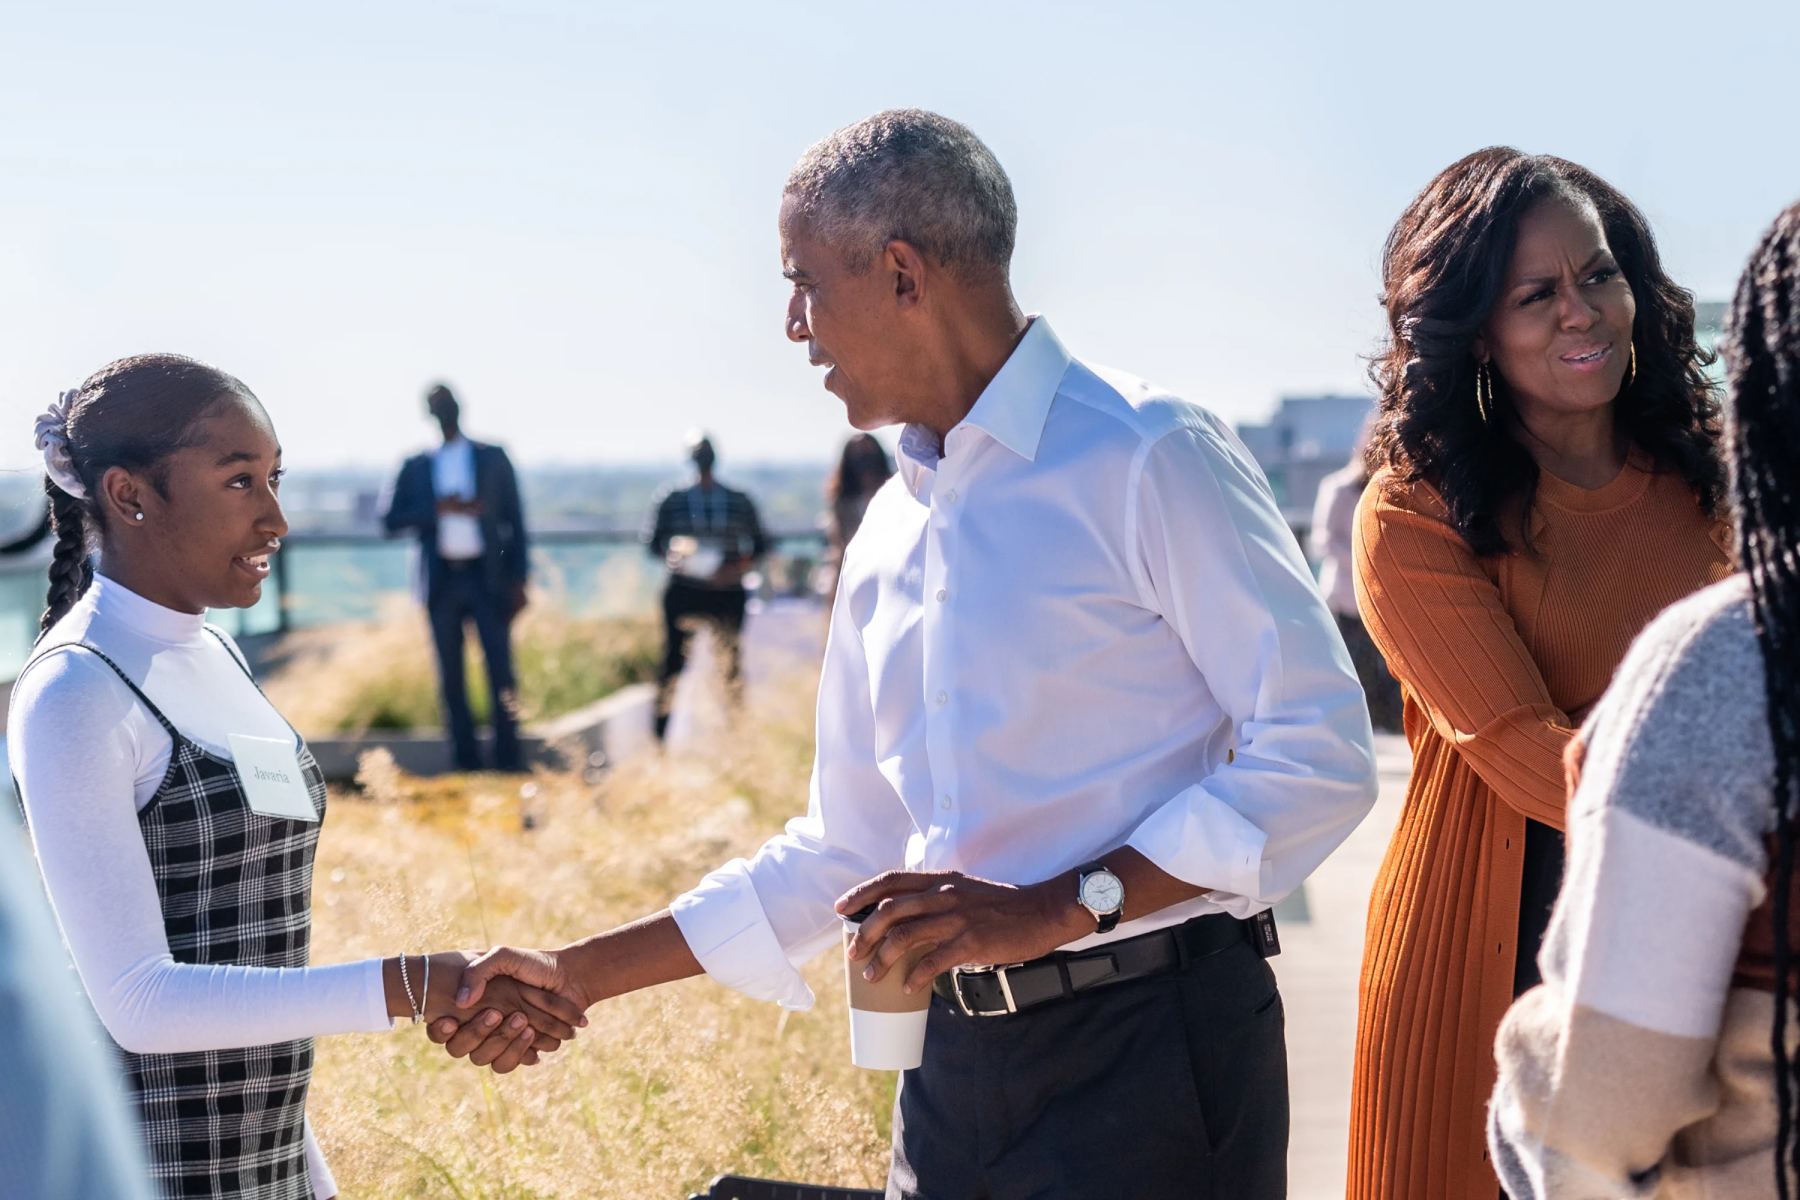 An image of Barack and Michelle Obama shaking the hands of two people while smiling. Barack Obama is shaking the hand of a teenage girl with a deep medium skin tone and dark hair pulled into a braid. Michelle Obama is shaking the hand of a woman with long braids. Barack Obama has a light deep skin tone and gray hair. He is wearing a light colored button down shirt with dark pants and holding a coffee cup in his left hand. Michelle Obama has a medium deep skin tone and curly dark hair. She is wearing an orange sweater and an orange shirt. The picture takes place outside. 